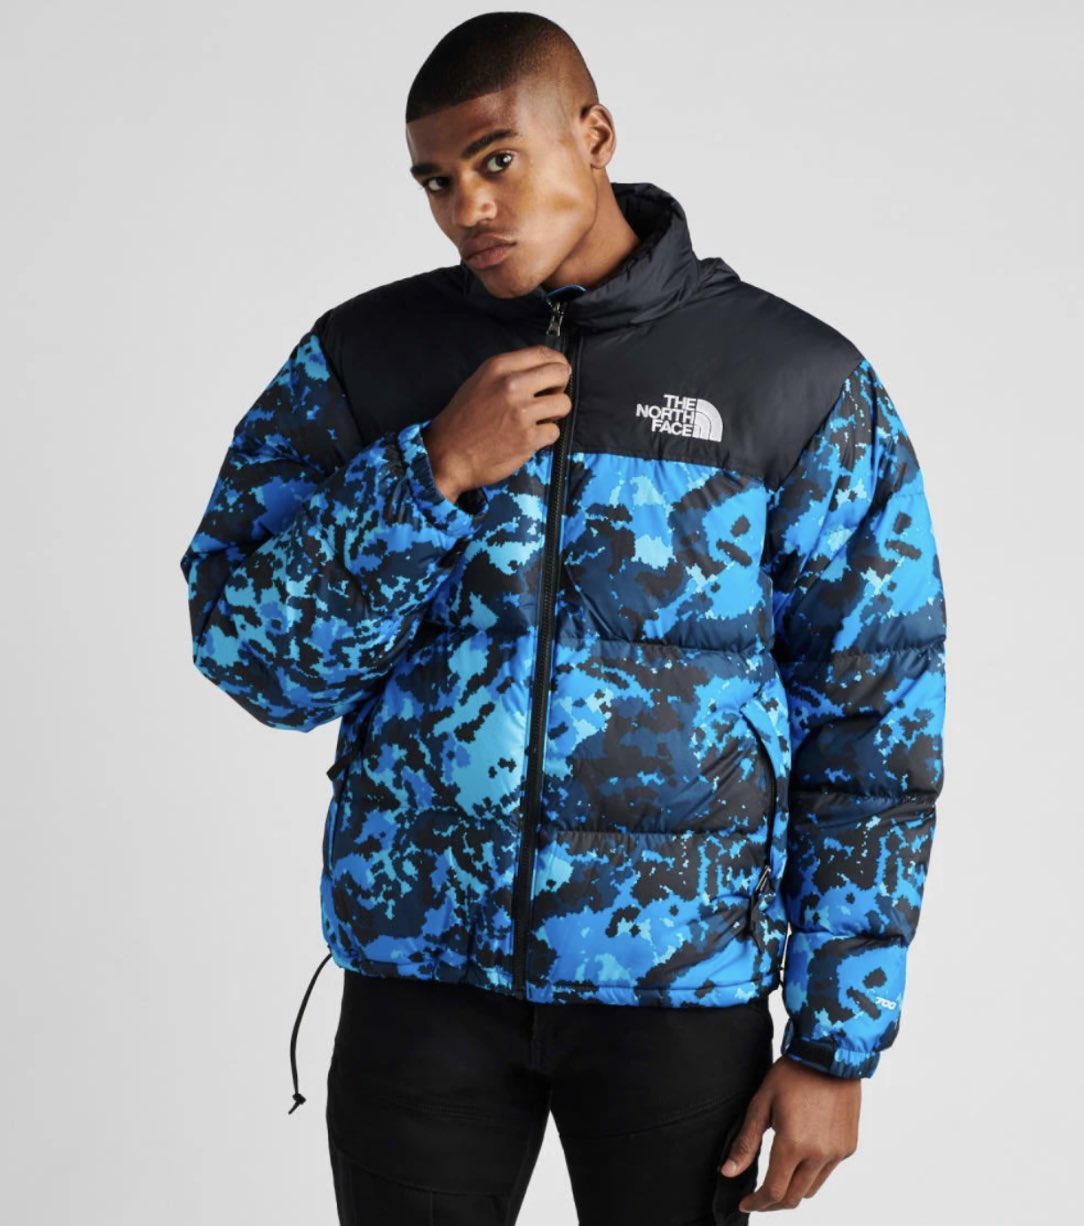 SNKR_TWITR on Twitter: "The North Face 1996 Nuptse Jackets Blue Camo https://t.co/Hqd9pZFpeD Timber Tan https://t.co/ALGDWjWkUA #Ad https://t.co/pYhfW8KYmc" / Twitter